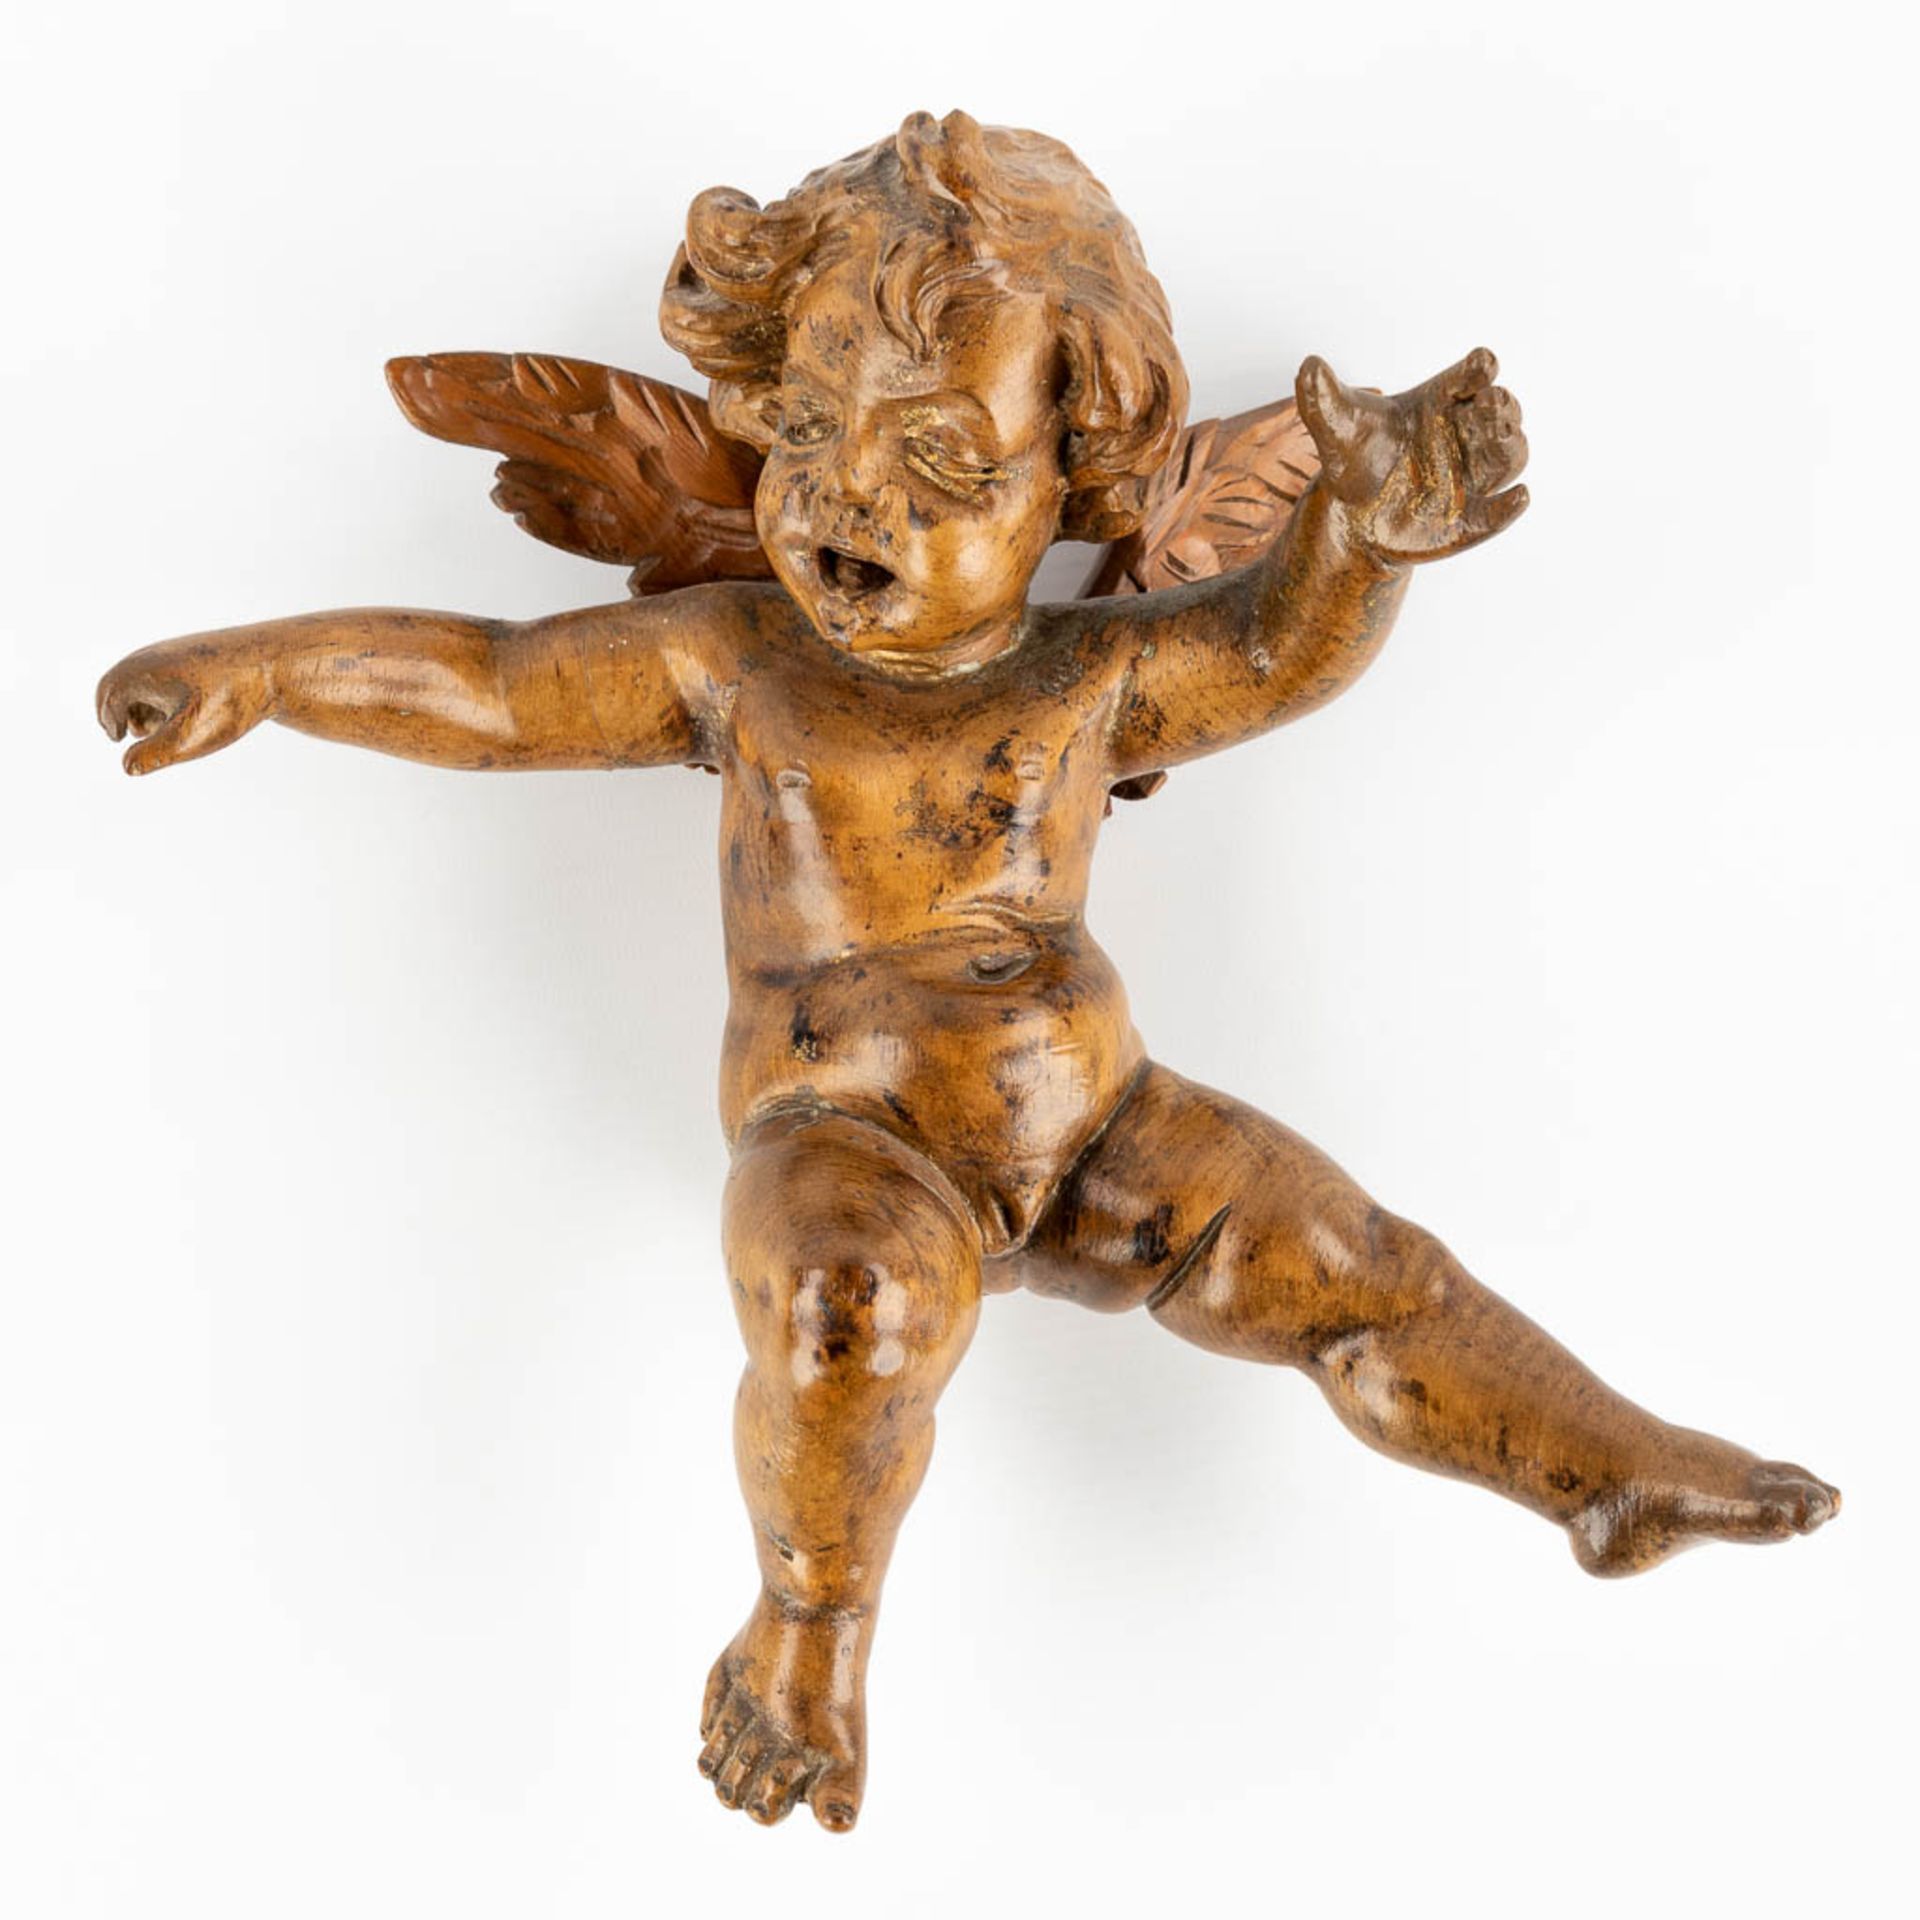 A pair of wood-sculptured putti, basswood, 18th C. (W:22 x H:30 cm) - Image 9 of 14